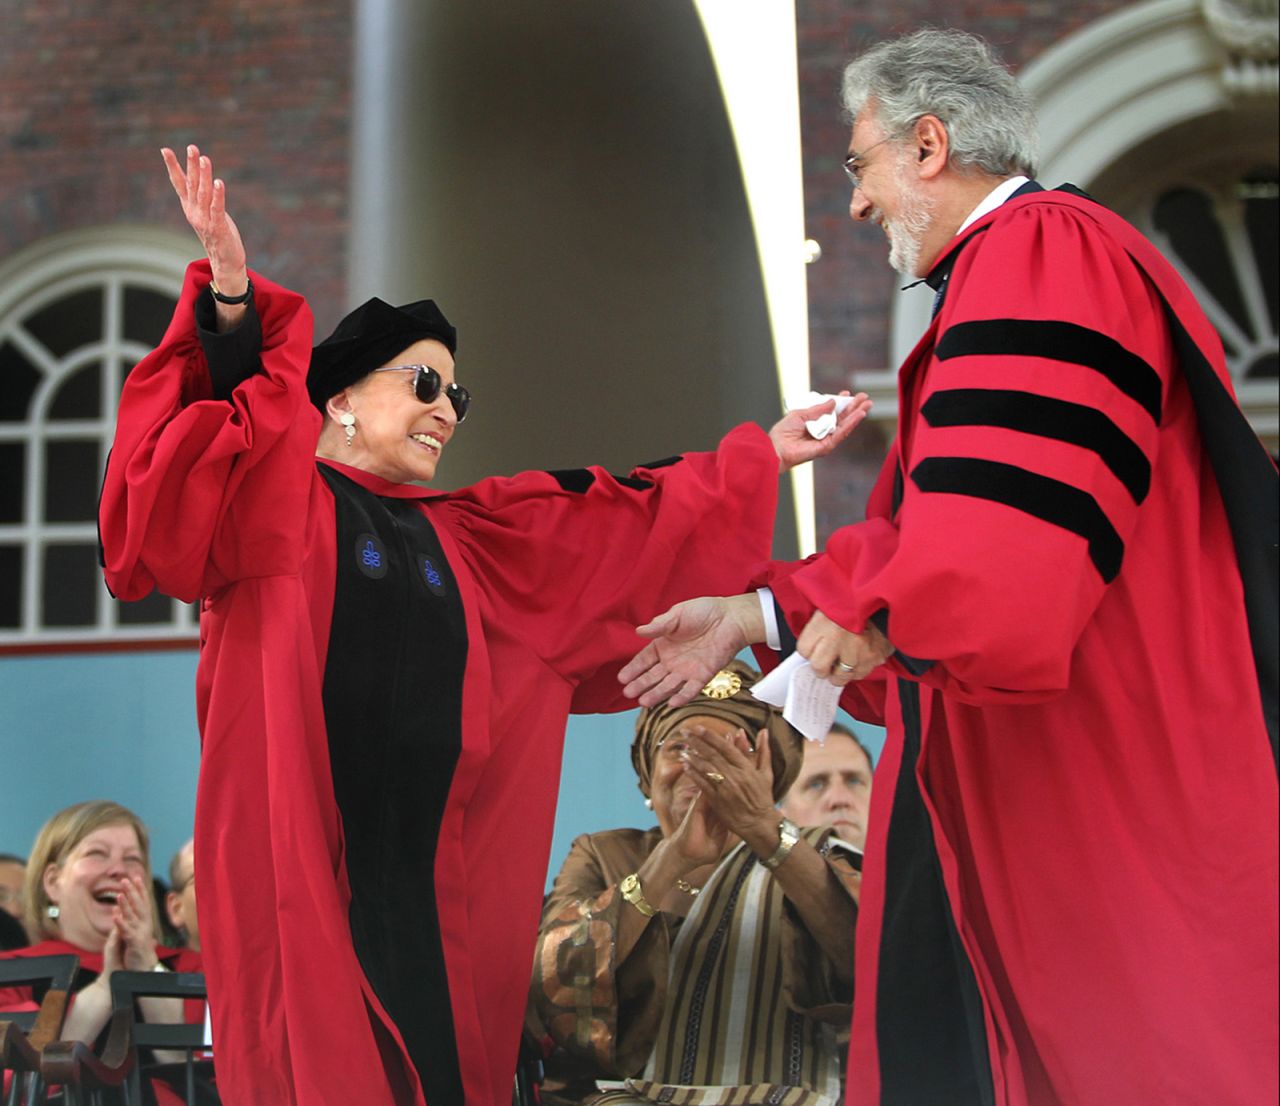 While standing to receive an honorary degree from Harvard University, Ginsburg was surprised with a serenade from Spanish tenor Placido Domingo in 2011. Domingo also received an honorary degree.